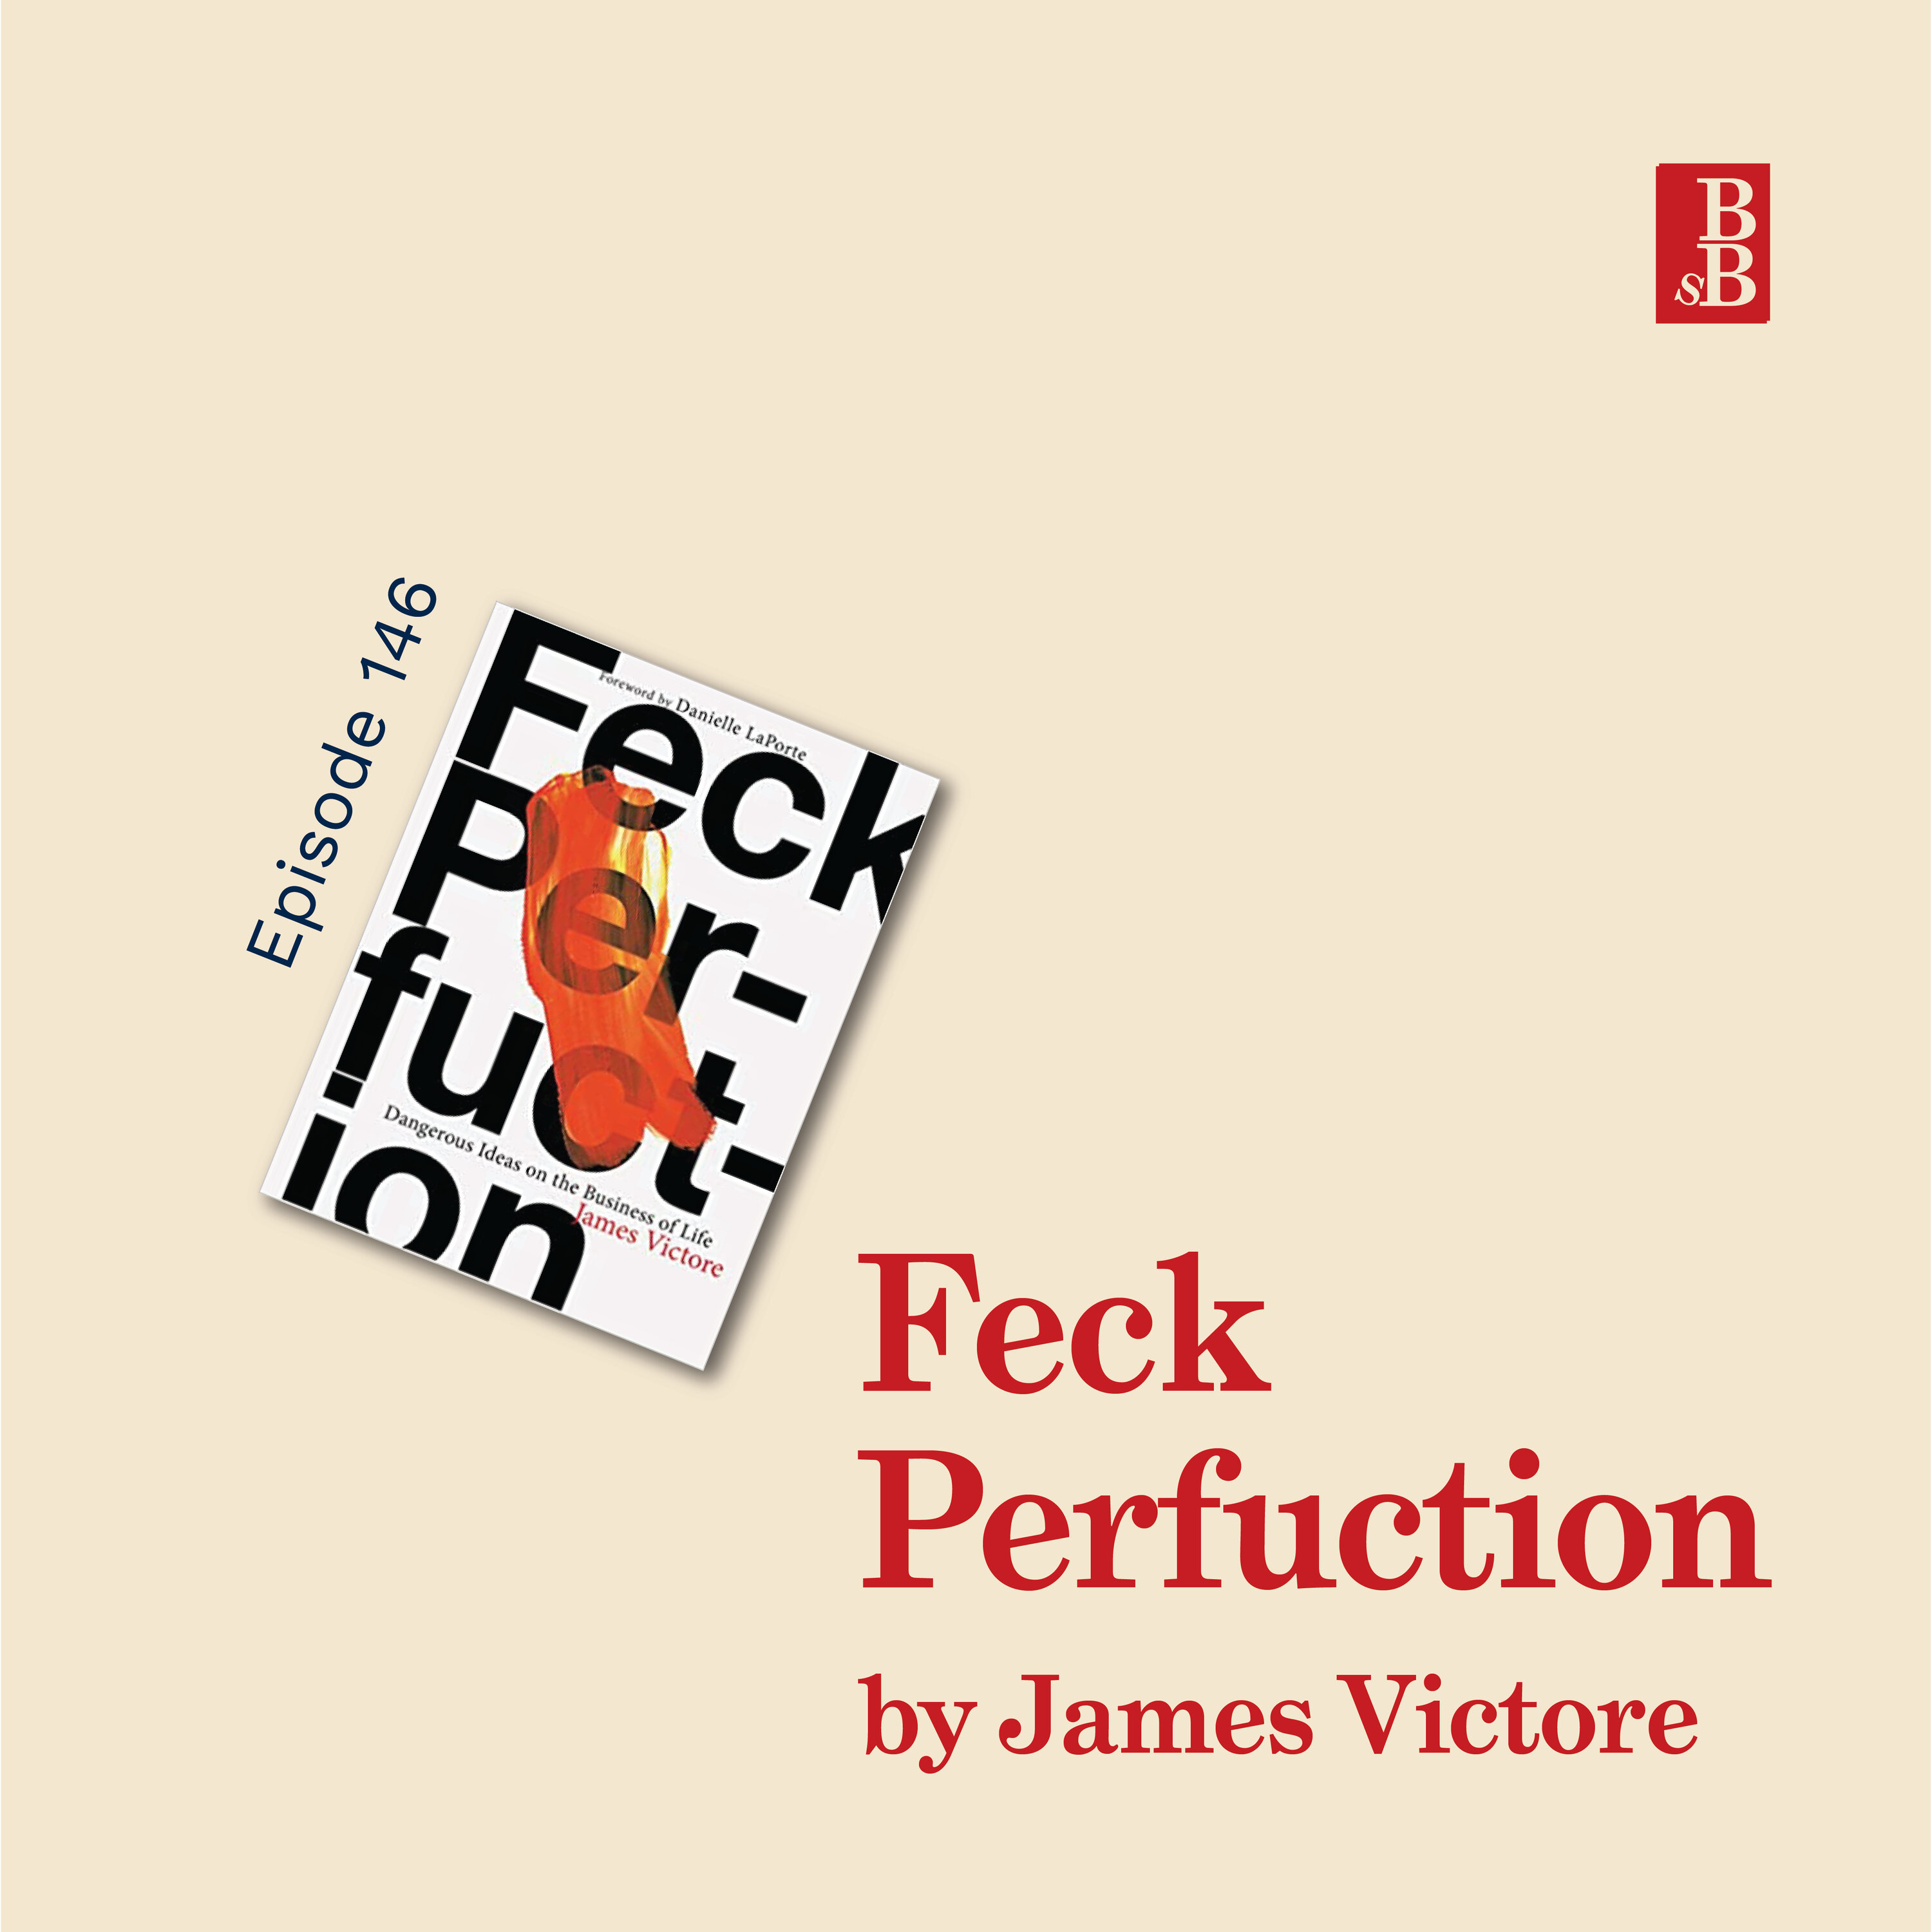 Feck Perfuction by James Victore: be more weird Image